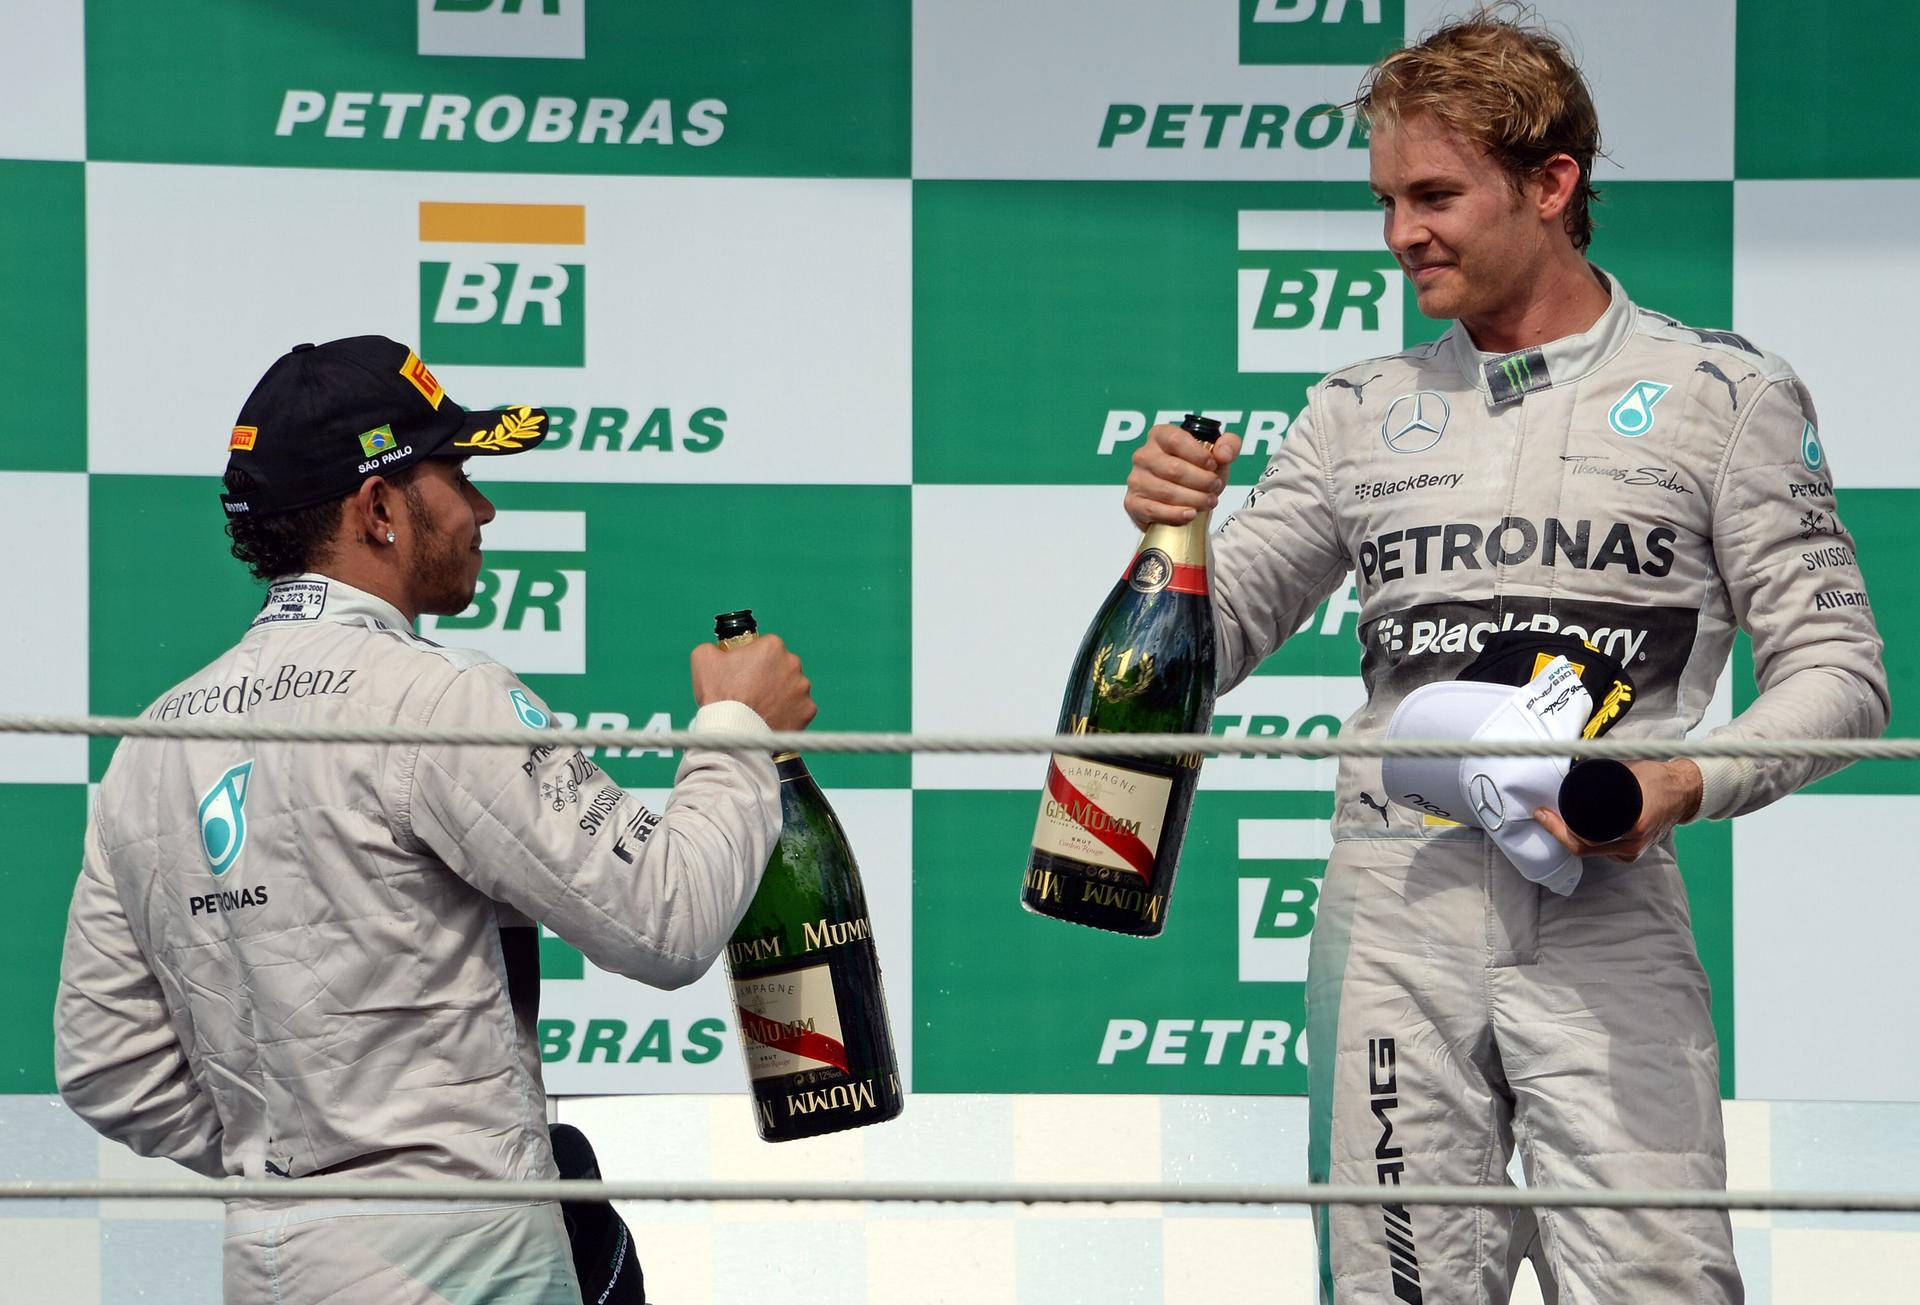 Will it be Lewis Hamilton or Nico Rosberg who wins the driver's championship? Either way, it makes for a thrilling finale. Photo: AFP